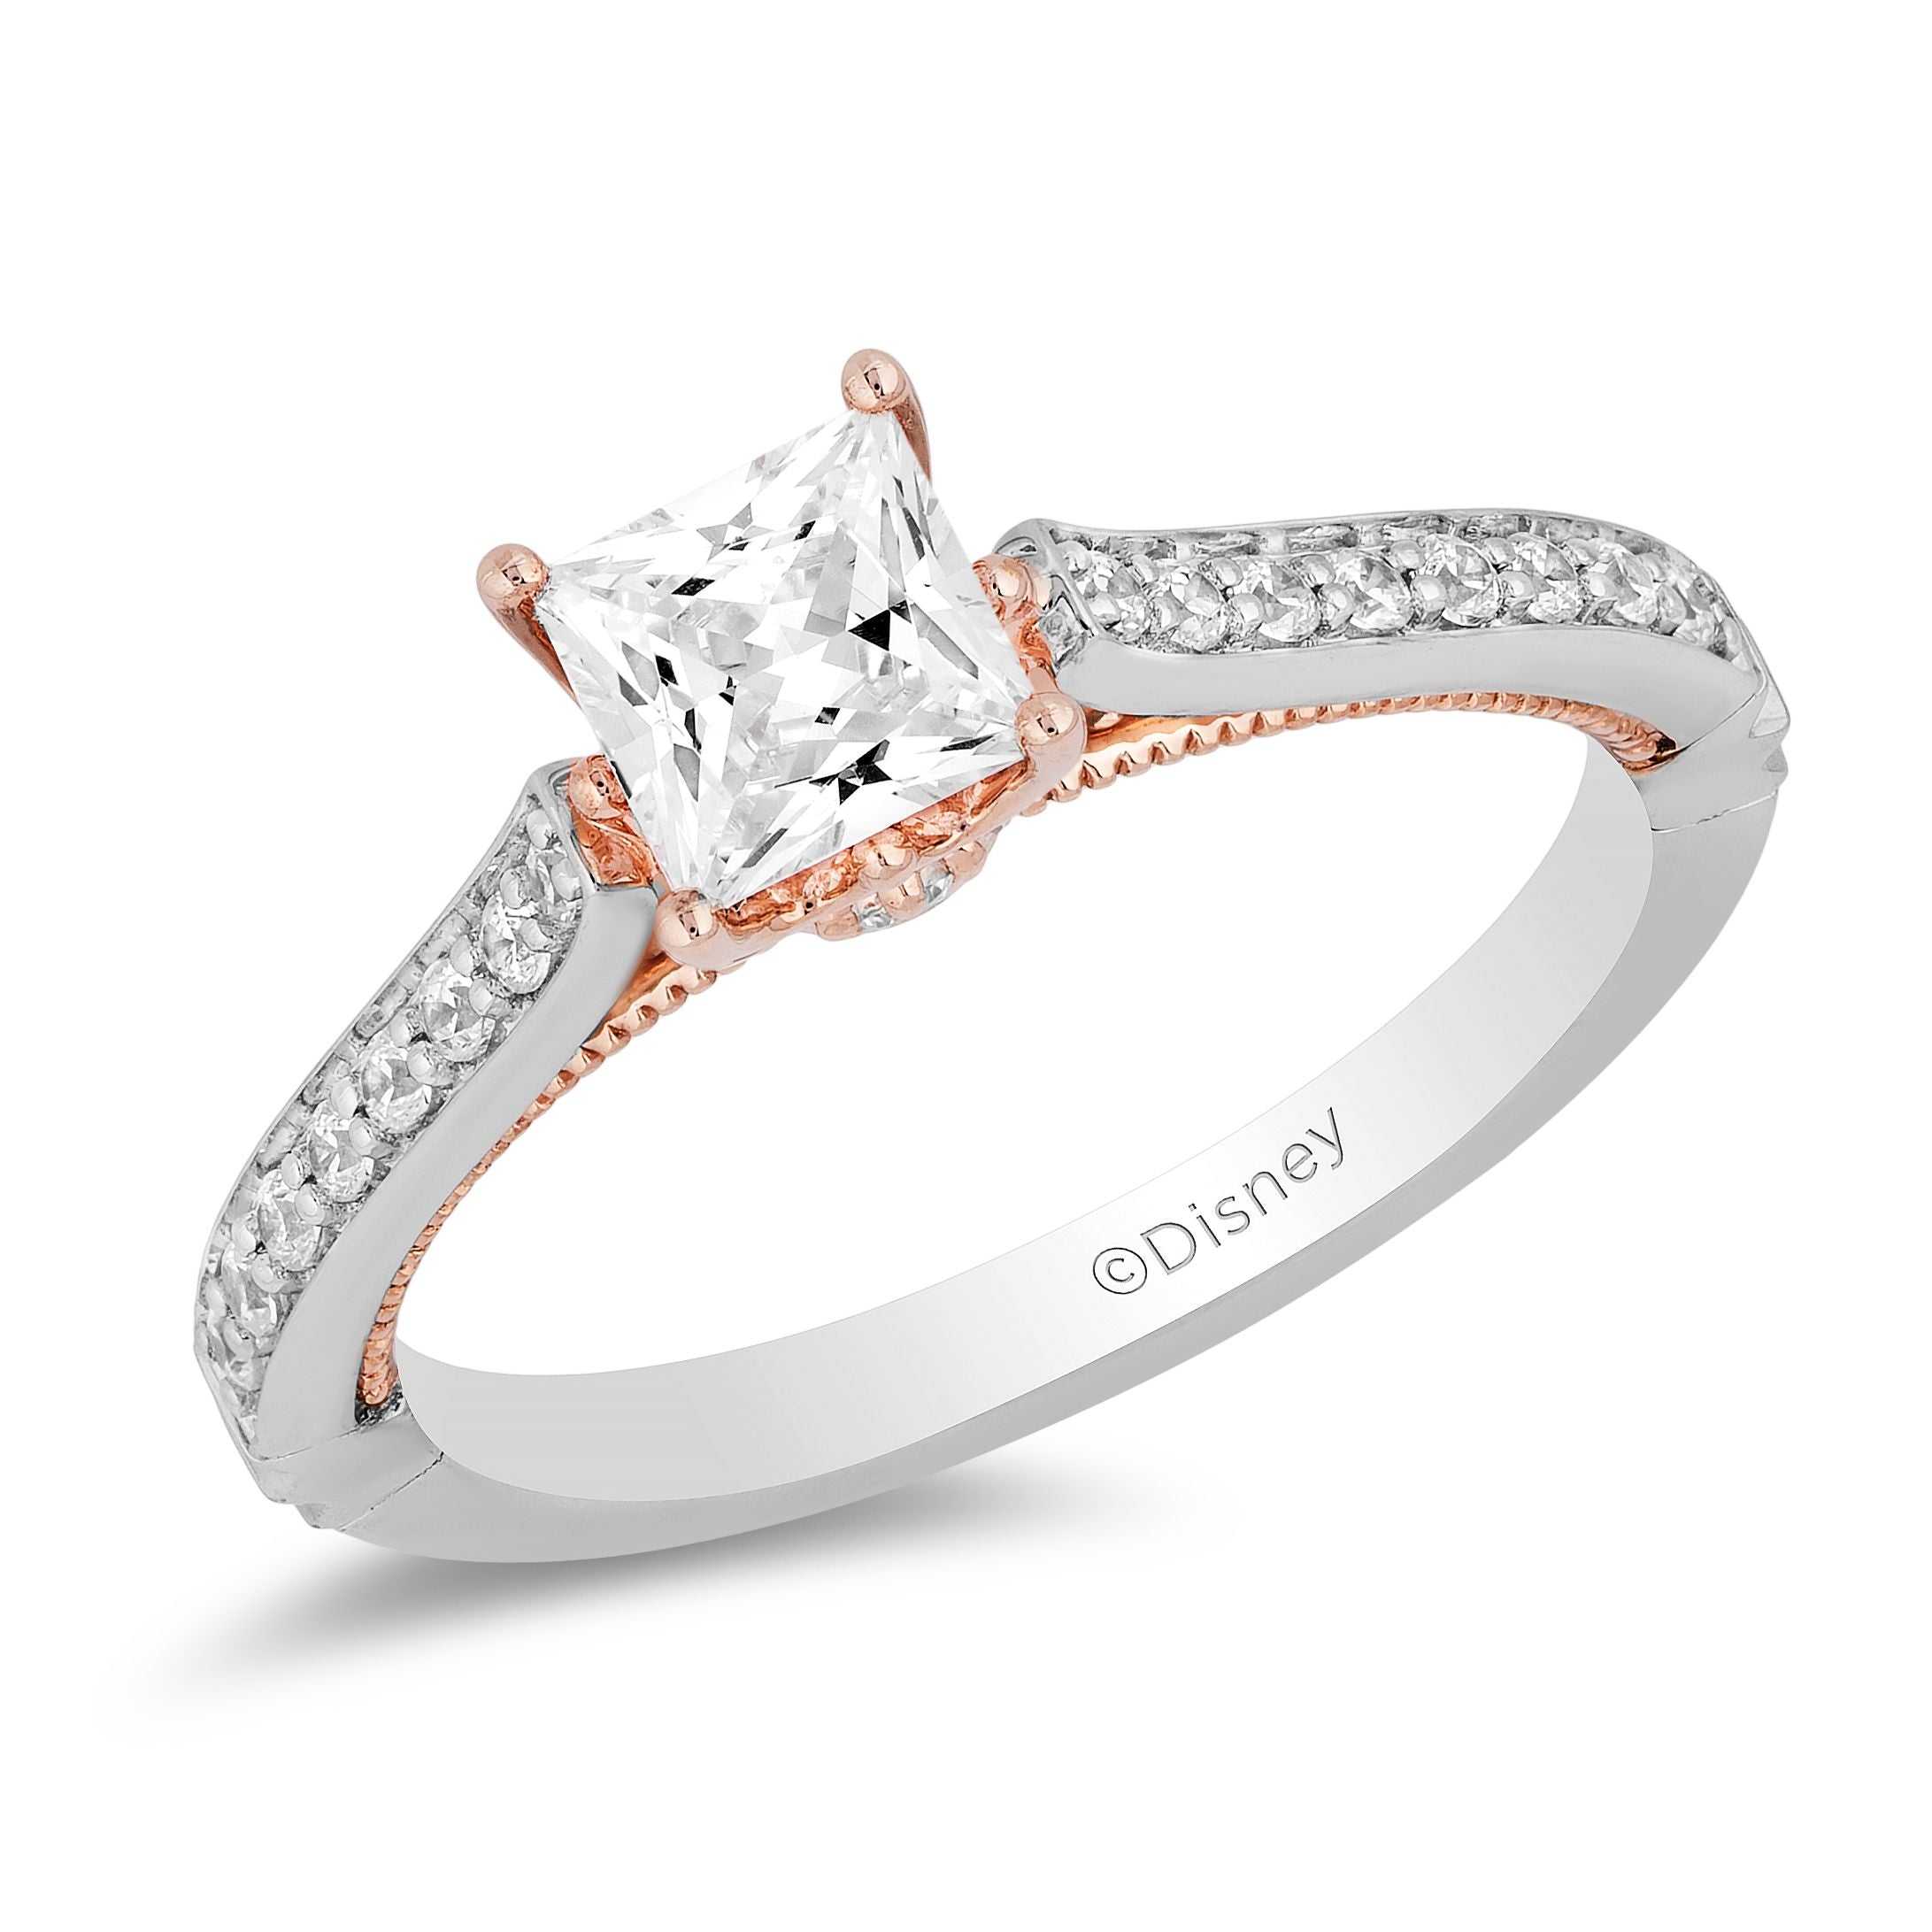 Disney Majestic Princess Inspired Diamond Crown Engagement Ring in 14K  White Gold and Rose Gold 1 CTTW